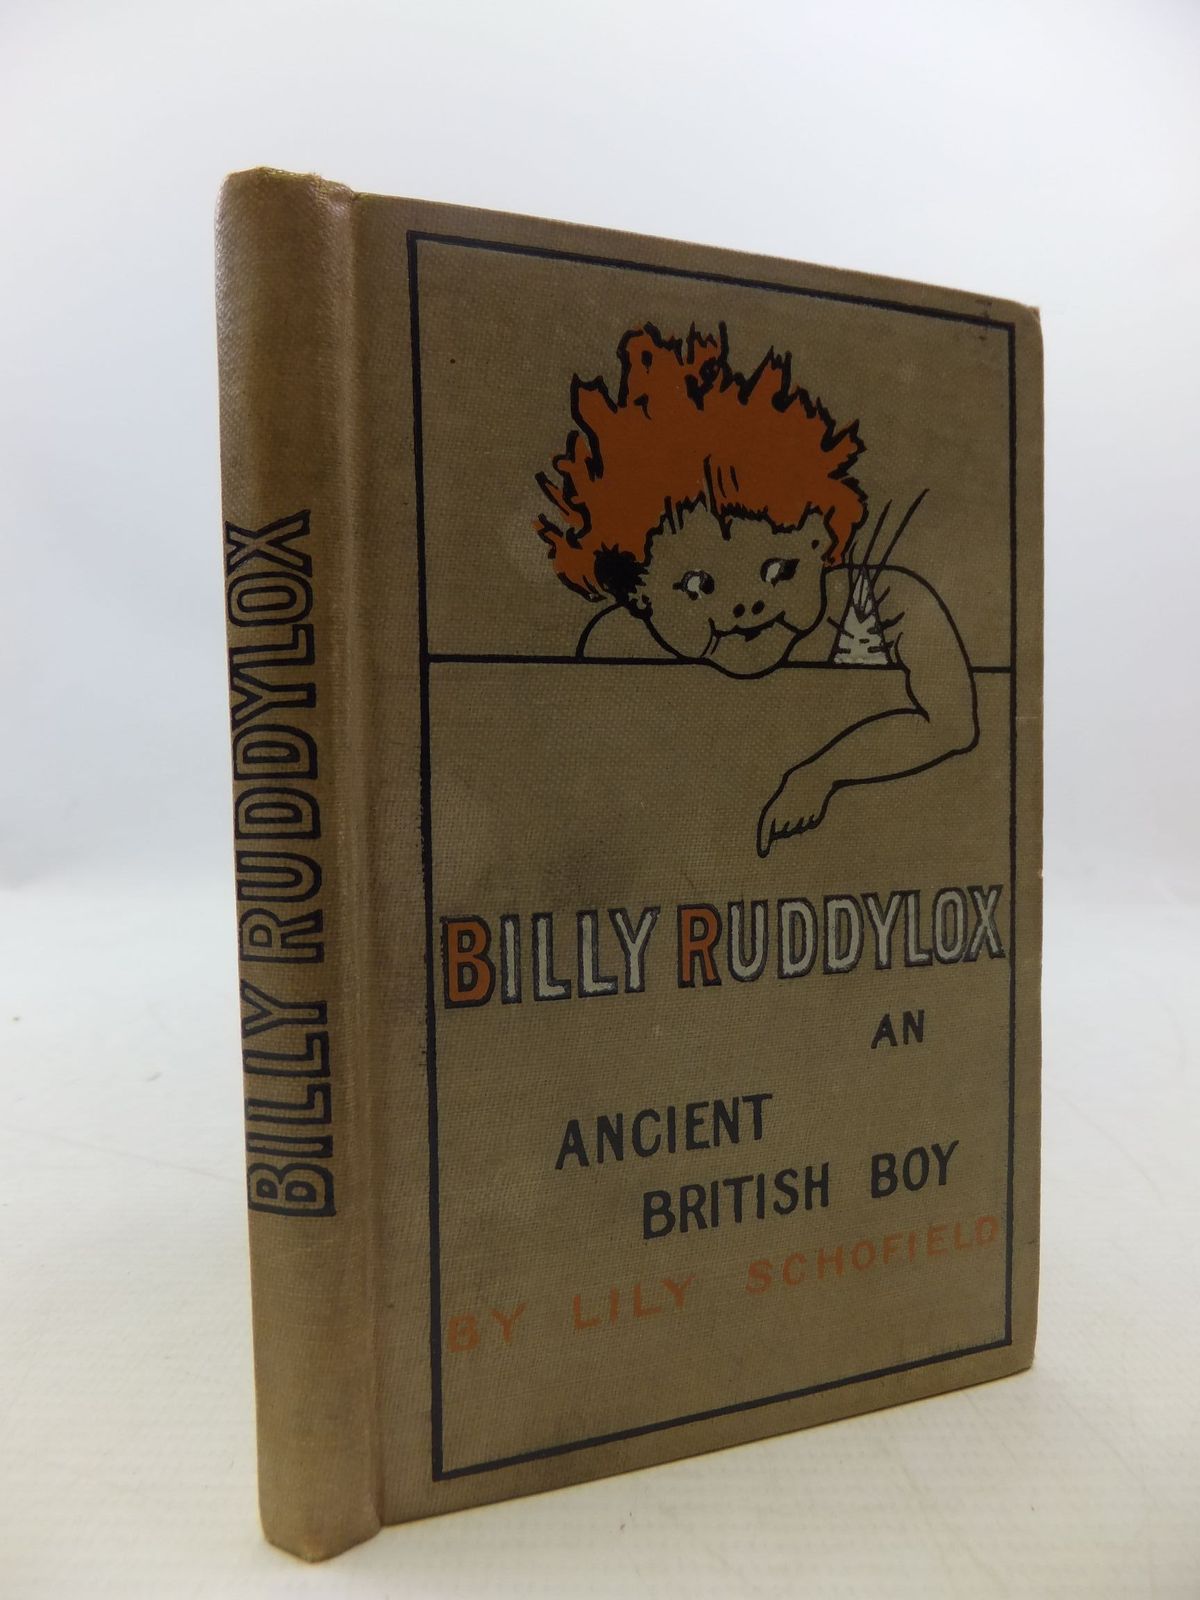 Photo of BILLY RUDDYLOX AN ANCIENT BRITISH BOY written by Schofield, Lilly illustrated by Schofield, Lily published by Swan Sonnenschein &amp; Co. Ltd. (STOCK CODE: 2112018)  for sale by Stella & Rose's Books